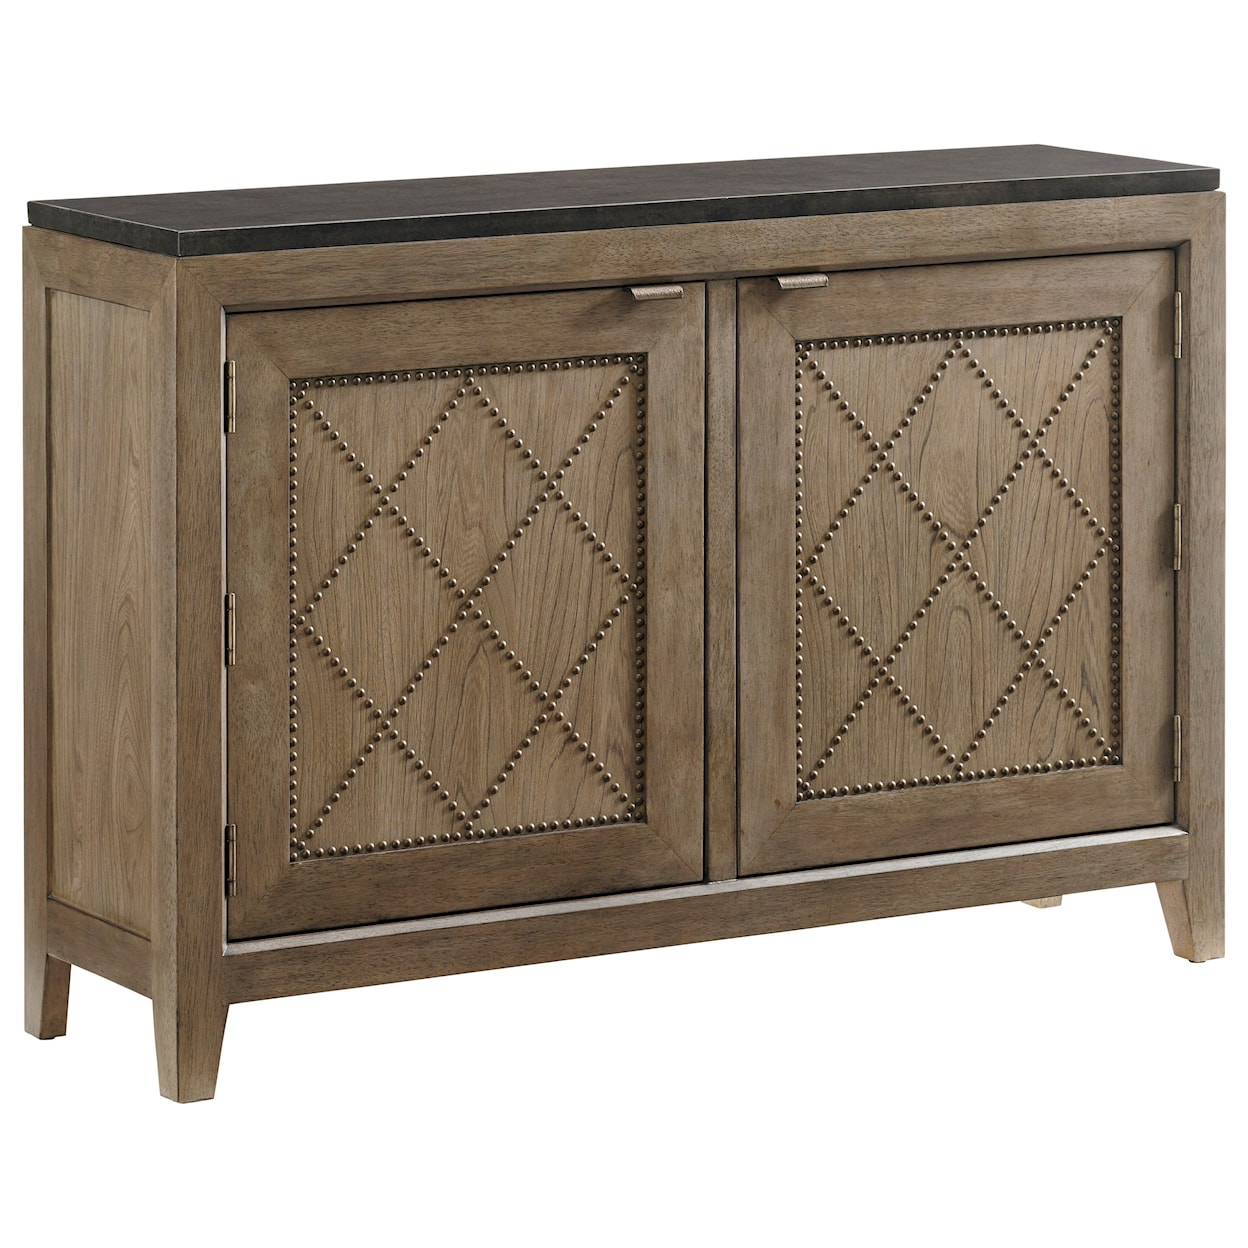 Tommy Bahama Home Cypress Point Emerson Hall Chest